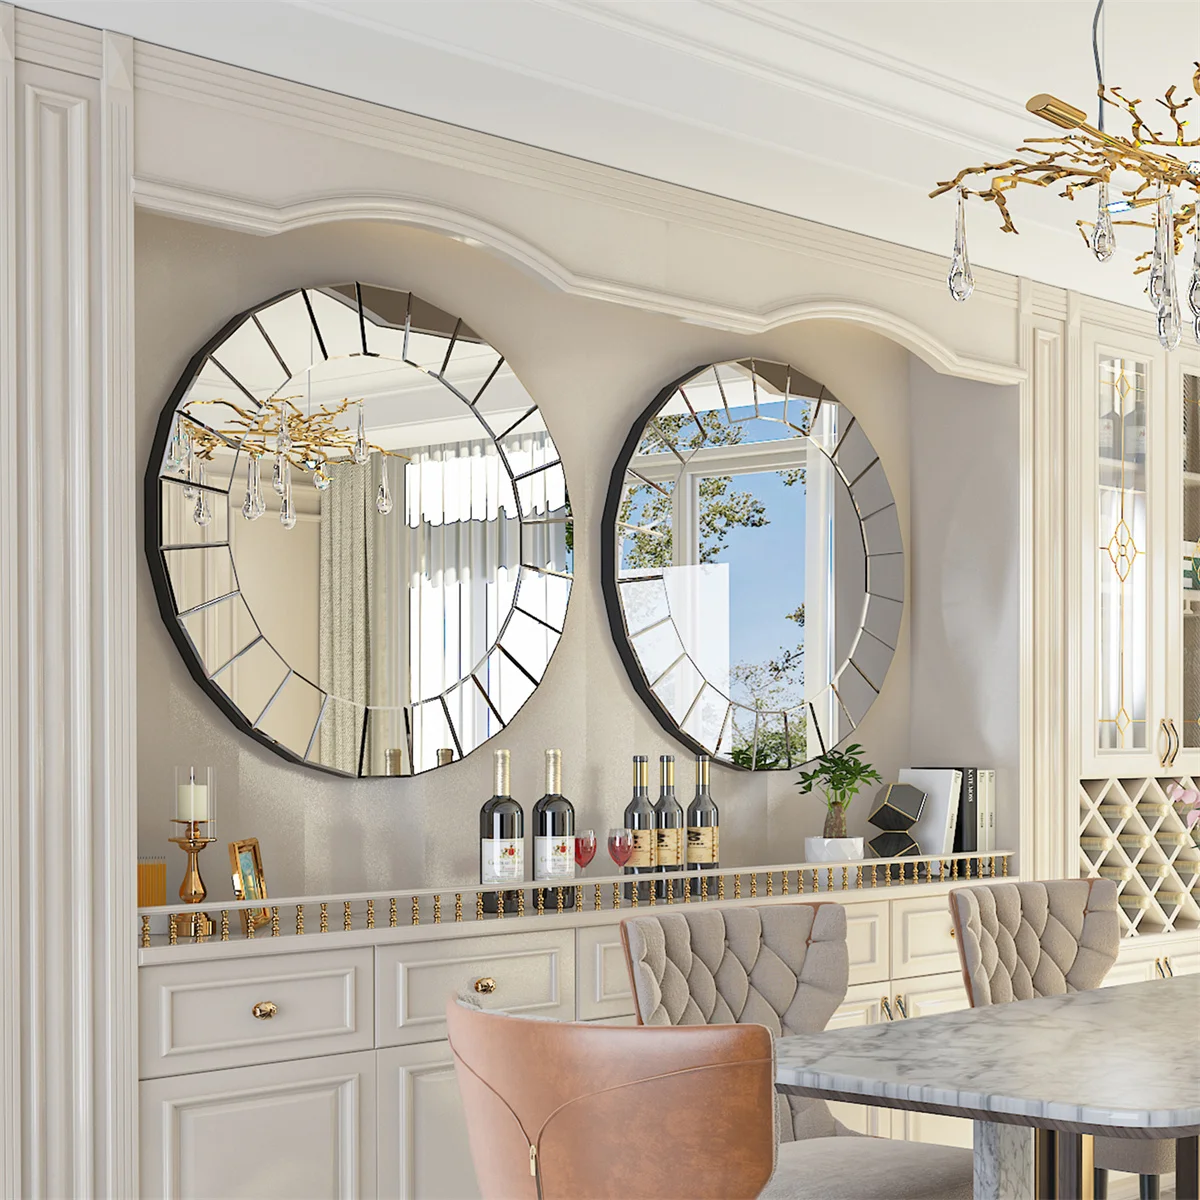 Top 5 Modern Wall Mirrors that Make an Aesthetic Statement